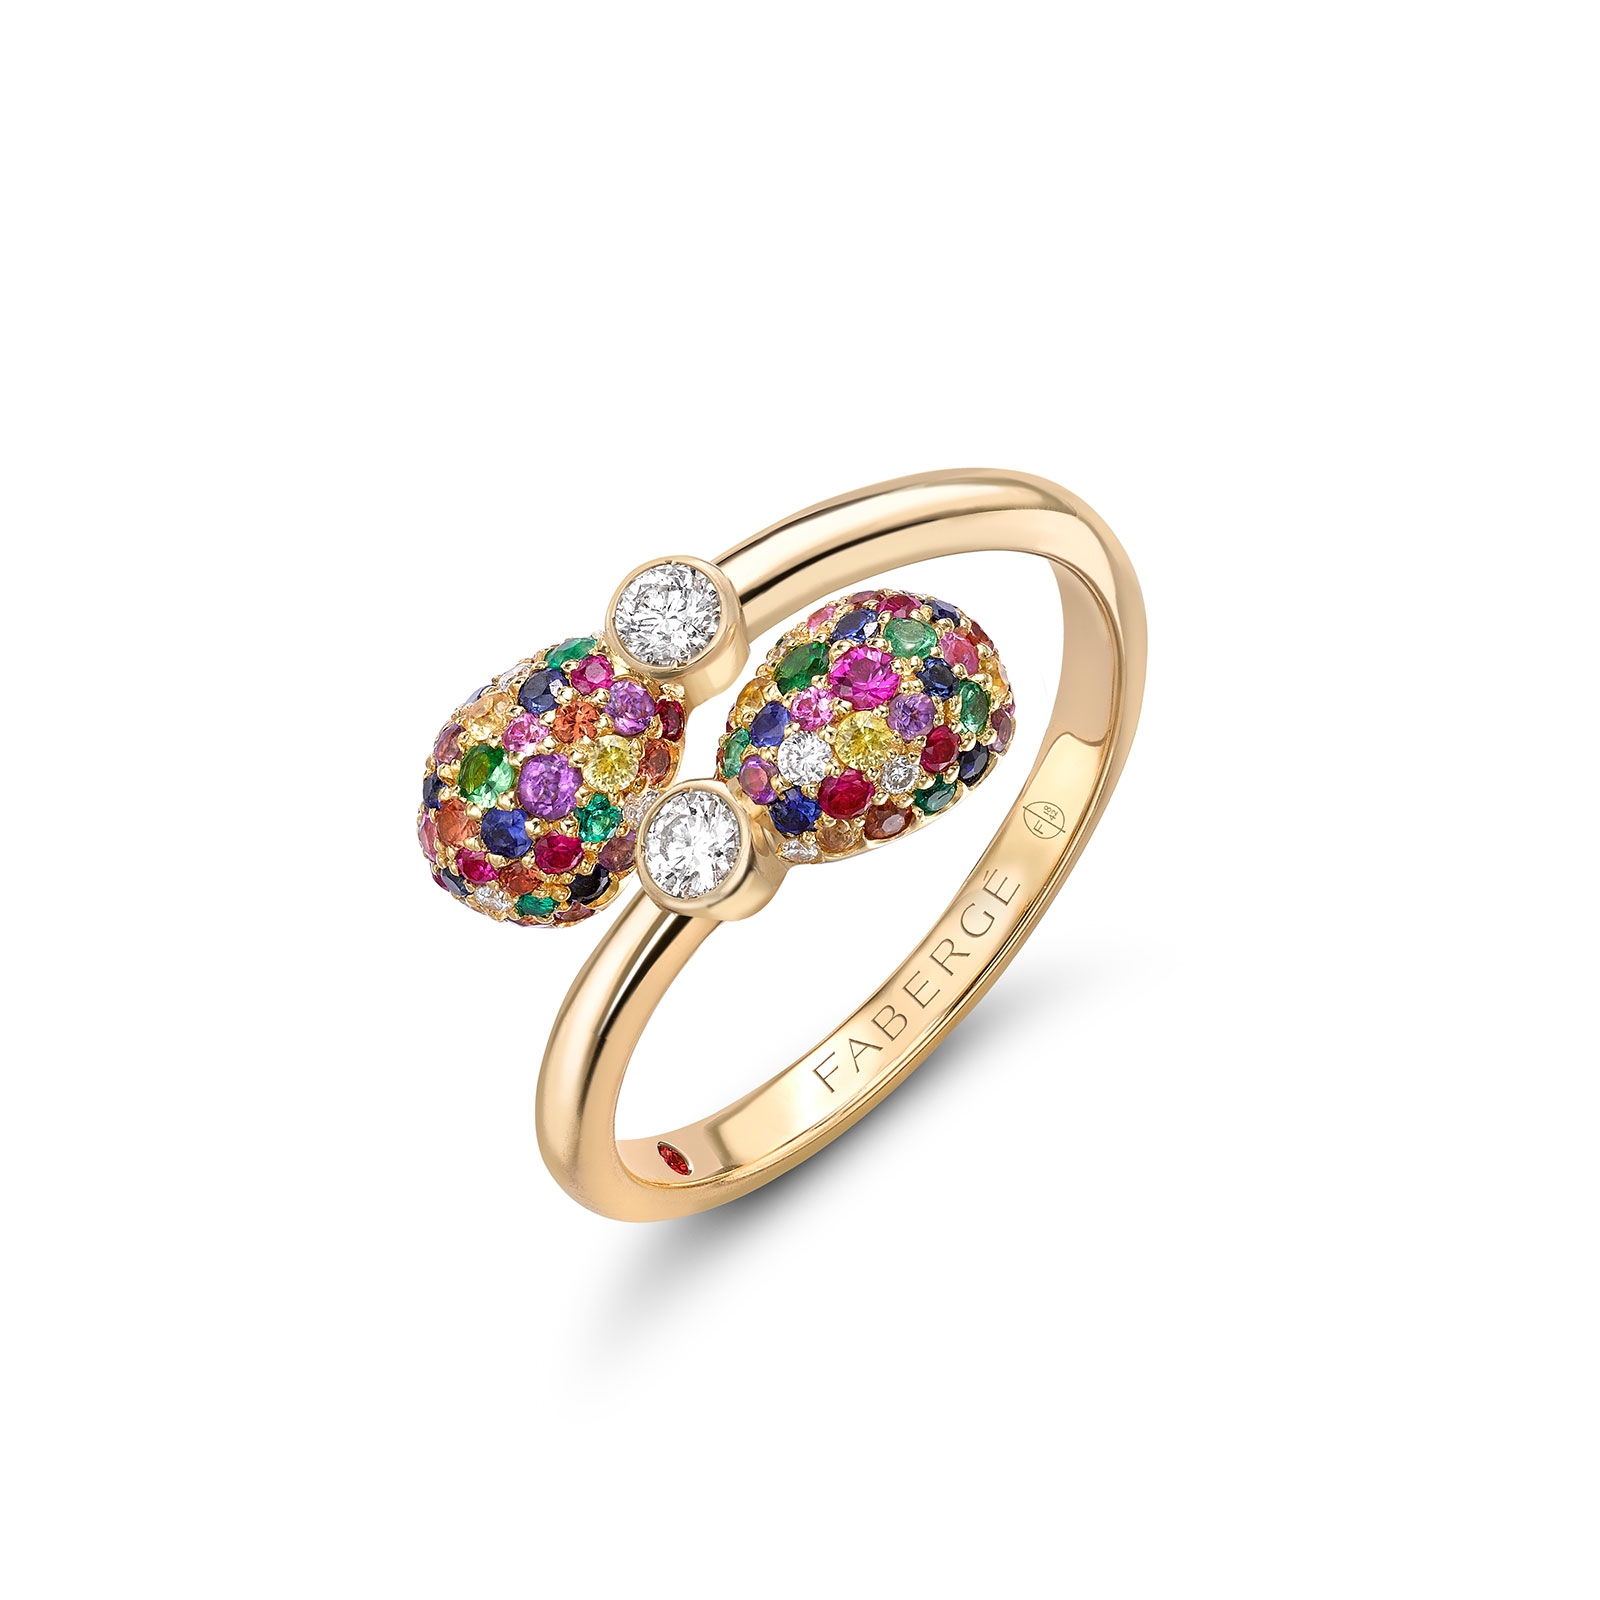 Fabergé Emotion Yellow Gold & Muticoloured Gemstone Crossover Ring 1165RG2107